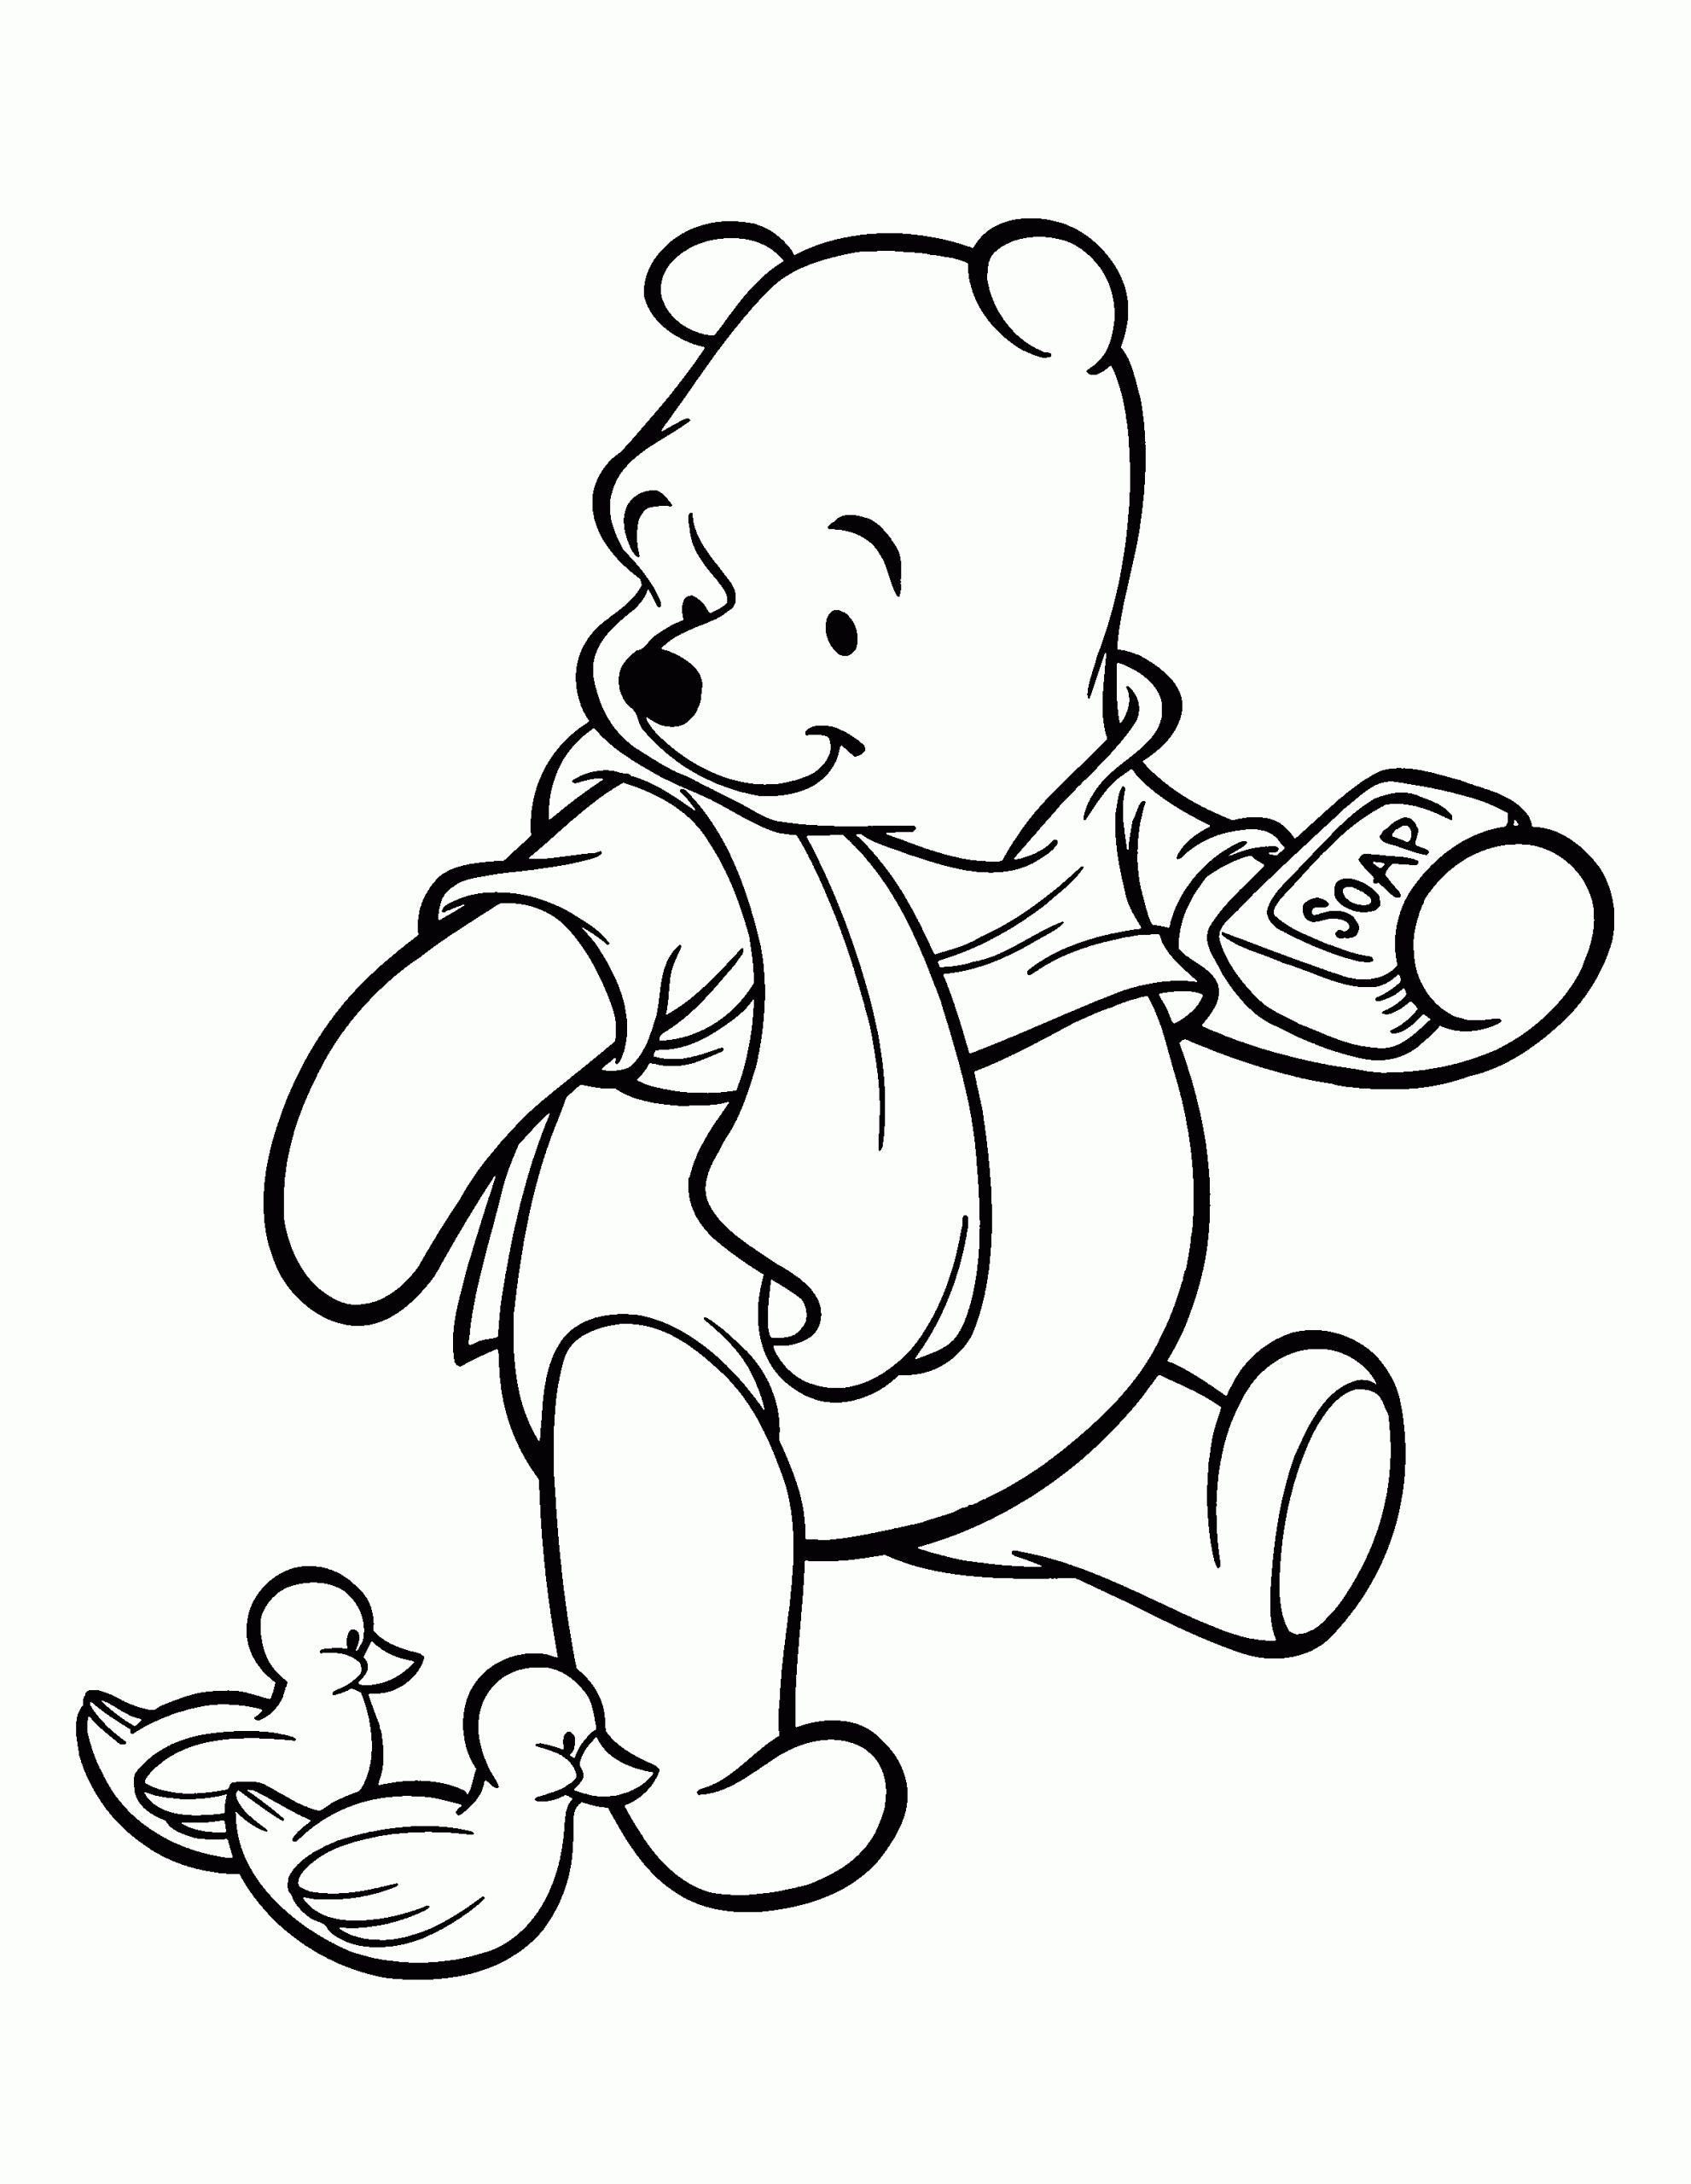 Baby Winnie The Pooh coloring